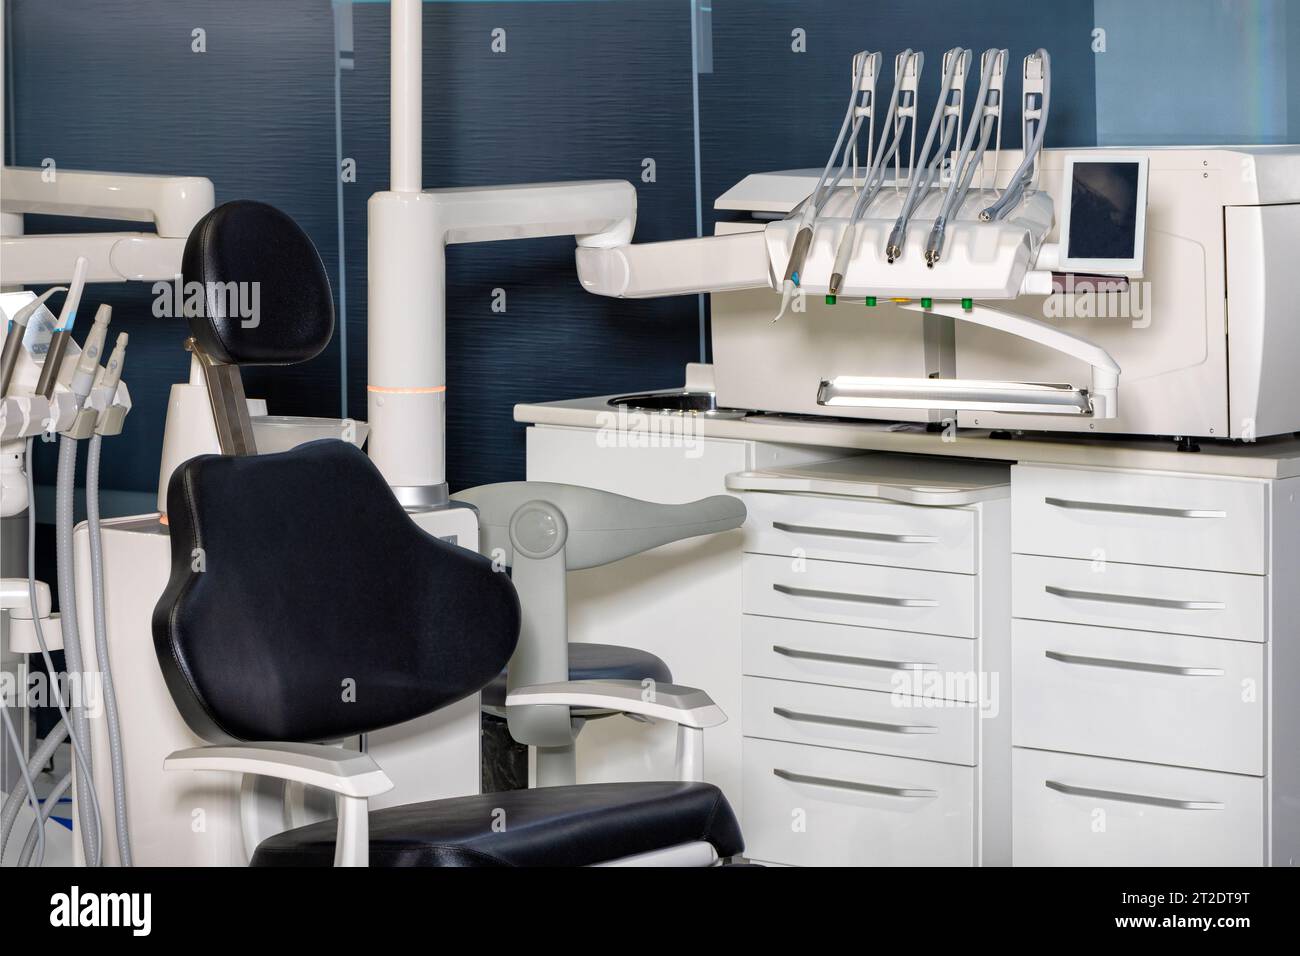 Modern medical dental equipment in a dentist's office close-up. Stock Photo